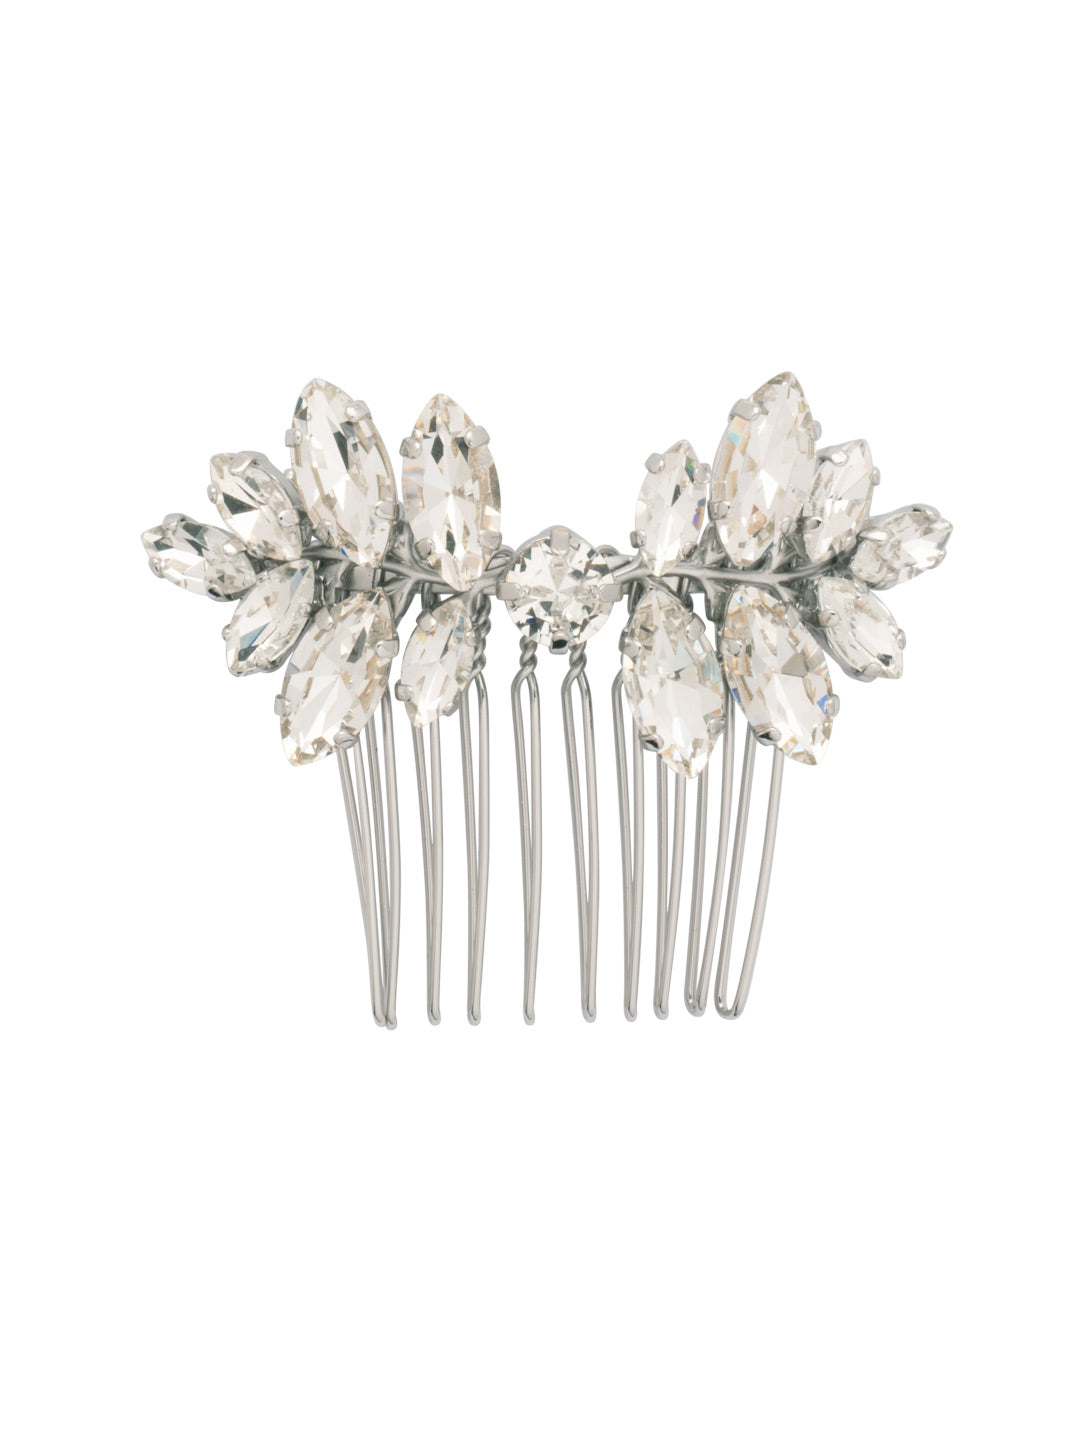 Enchanted Hair Pin - HFH9PDCRY - <p>The Enchanted Hair Pin truly lives up to its name. Featuring navette and round cut crystals on a sturdy metal comb clip, transform any hairstyle into an enchanting thing of beauty. From Sorrelli's Crystal collection in our Palladium finish.</p>